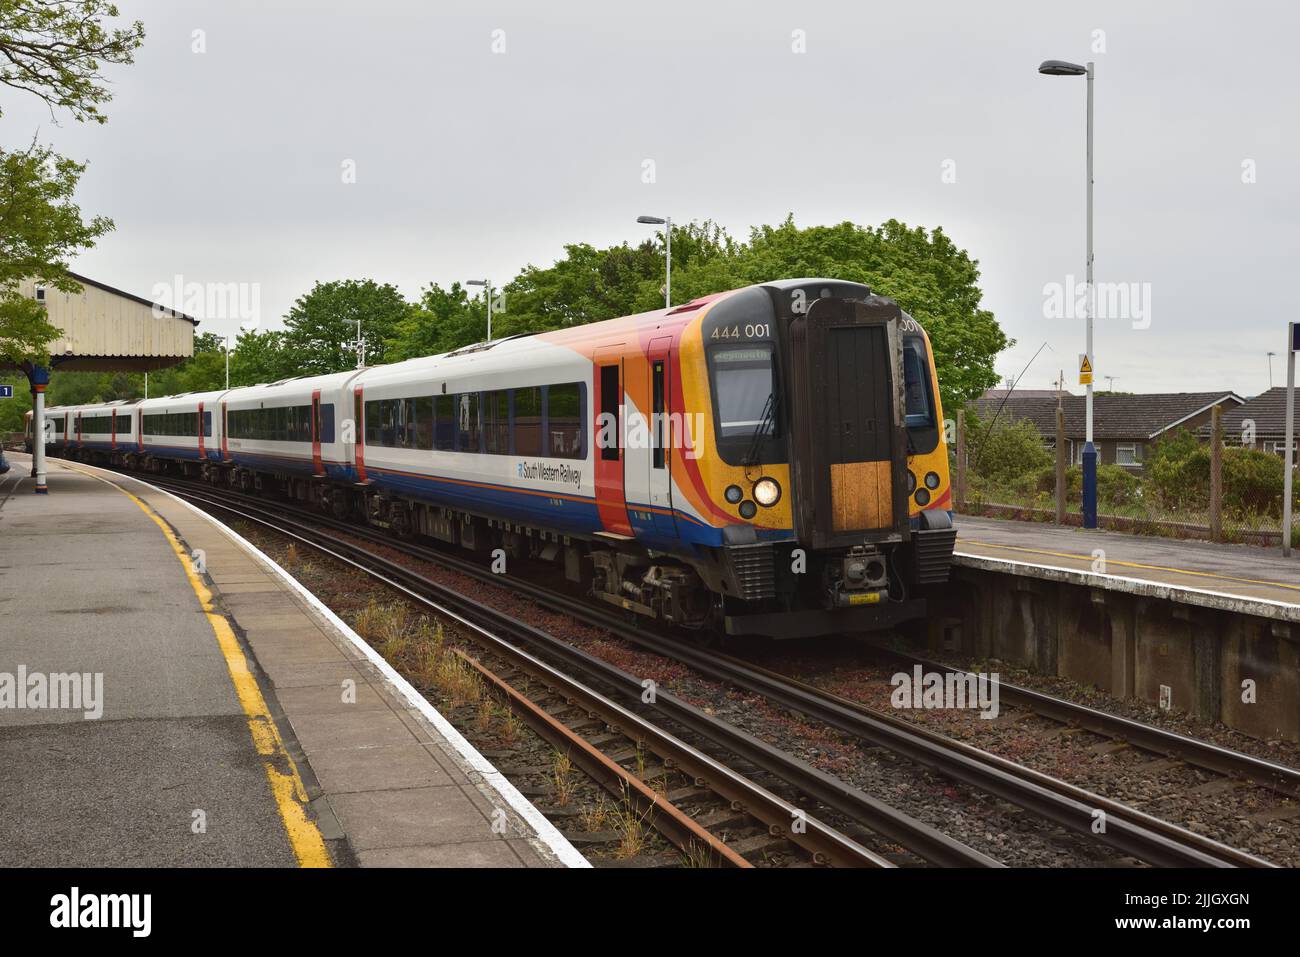 South Western Railway Class 444 Desiro electric multiple unit 444001 arrivs at Hamworthy on a Waterloo - Weymouth service on 12th May 2018. Stock Photo